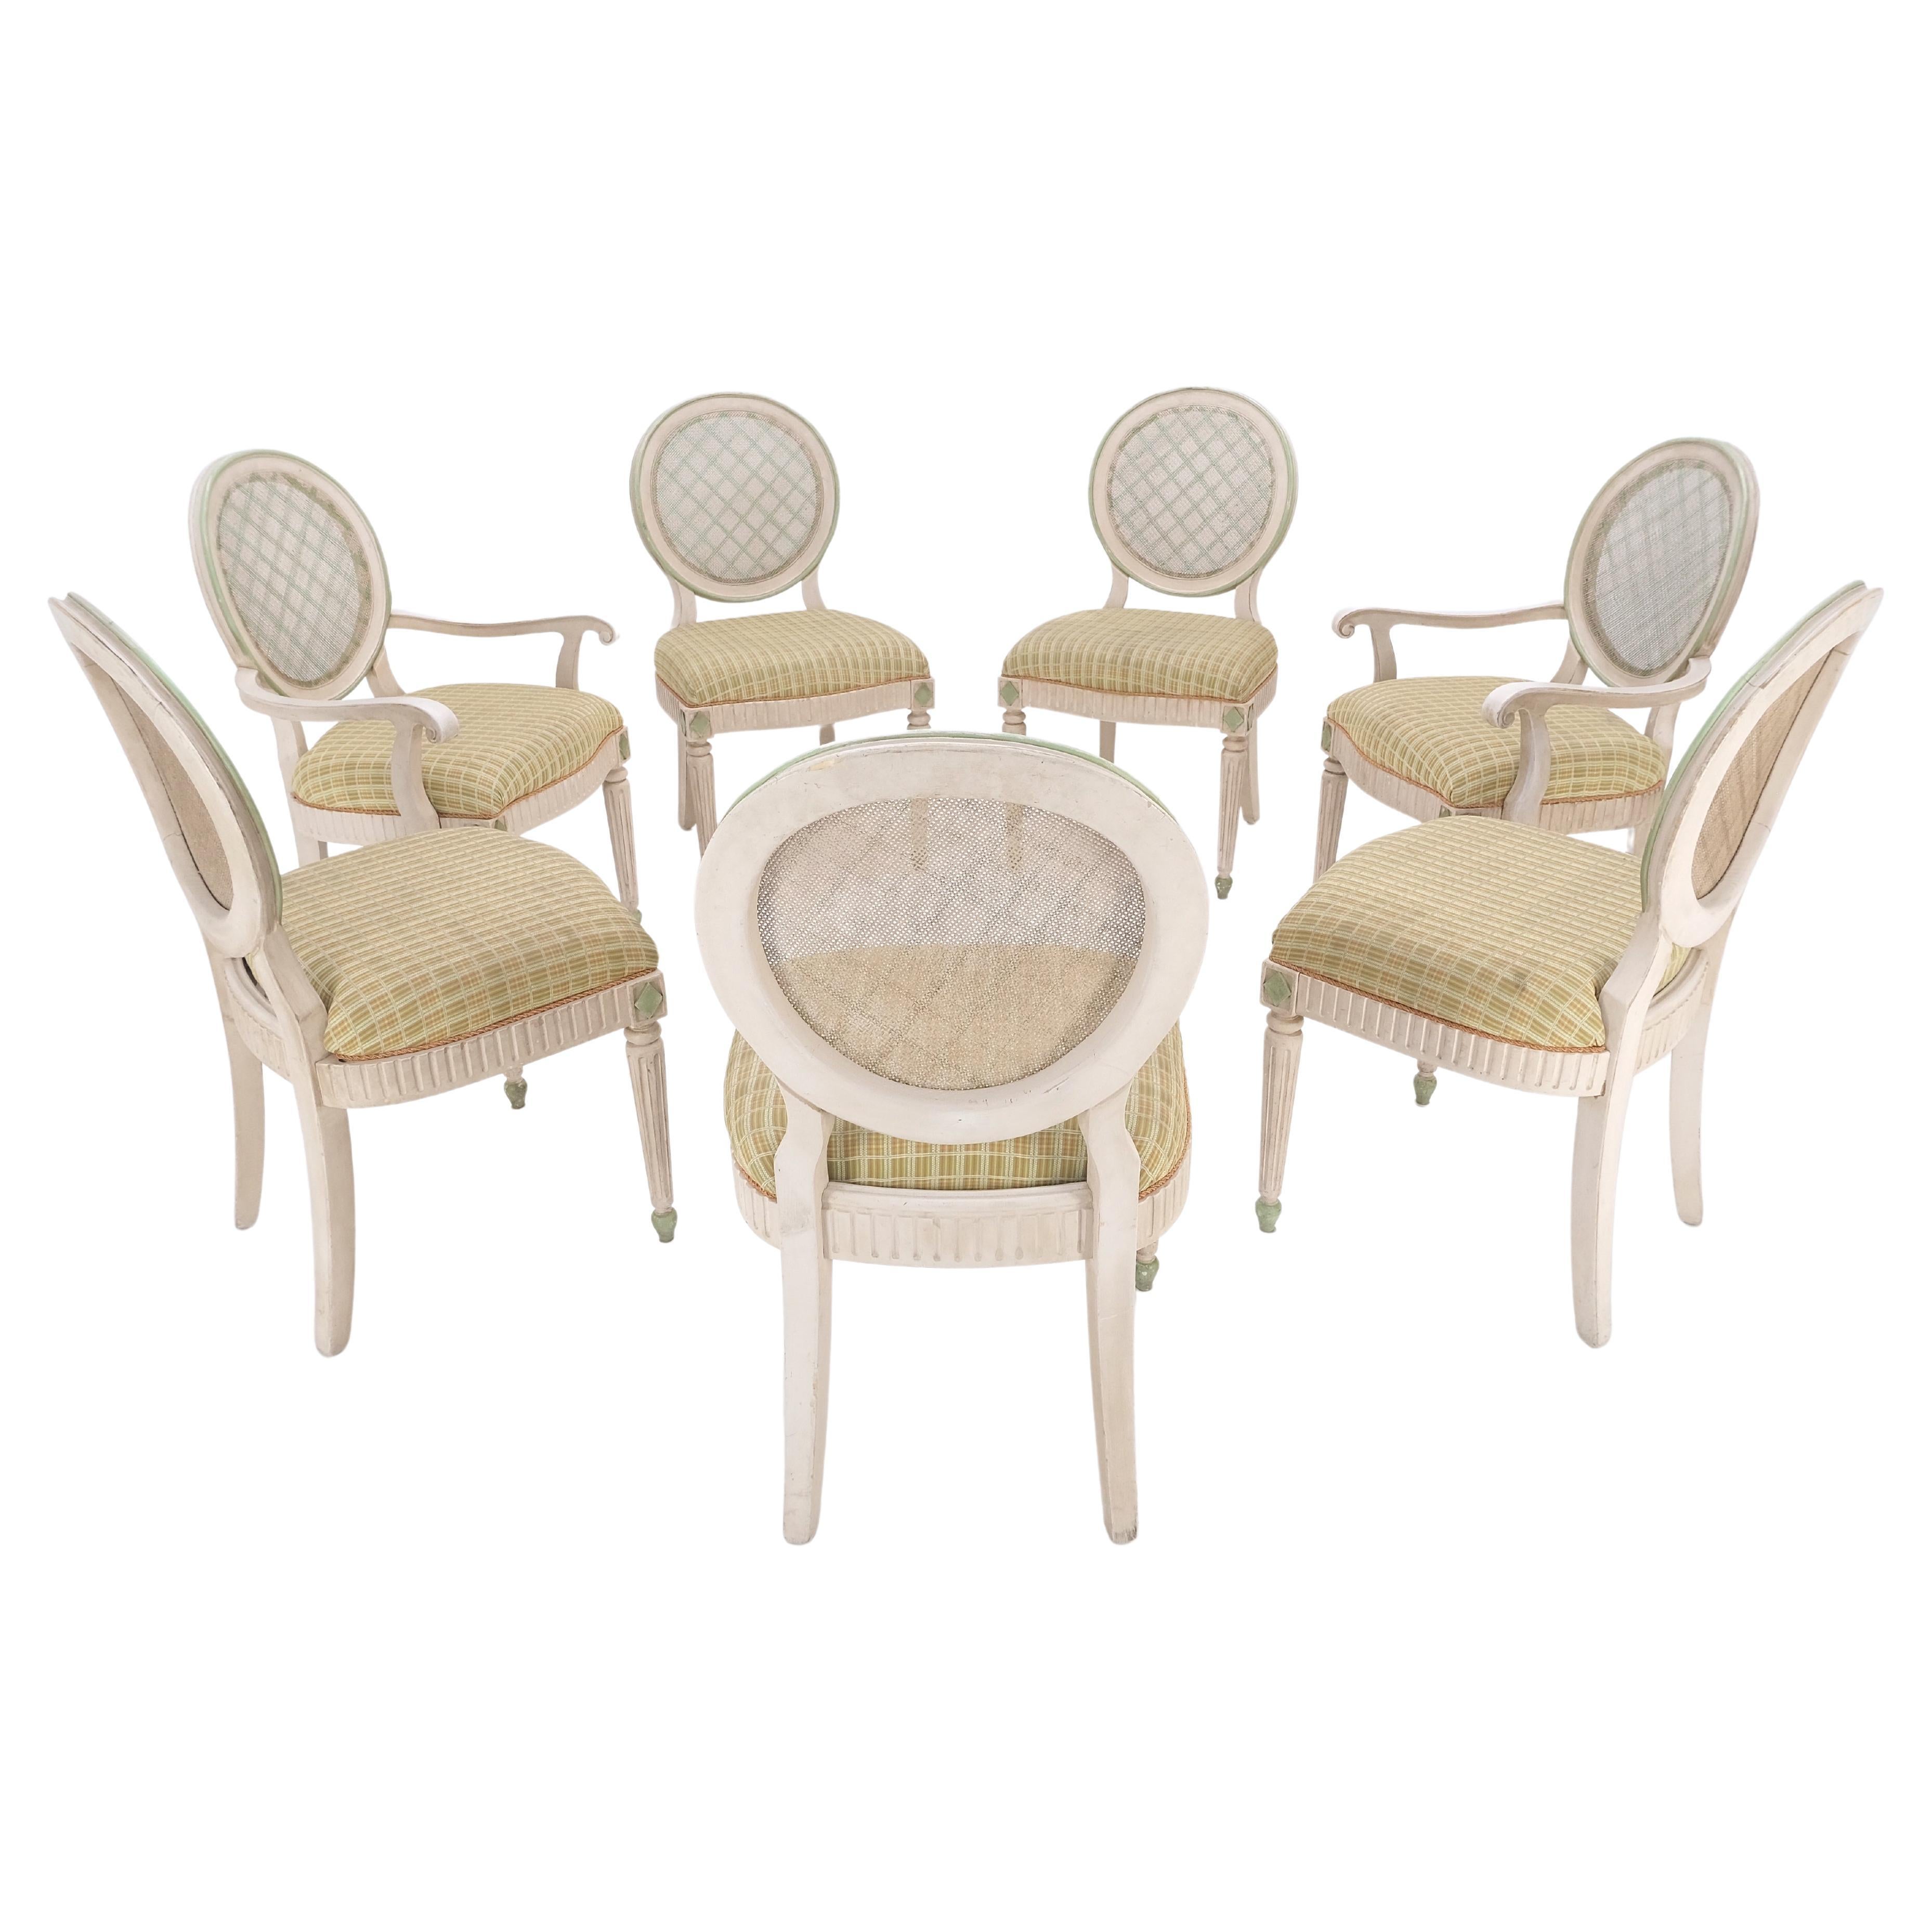 Set of 7 Swedish White Wash Paint Decorated Oval Cane Backs Dining Chairs NICE! For Sale